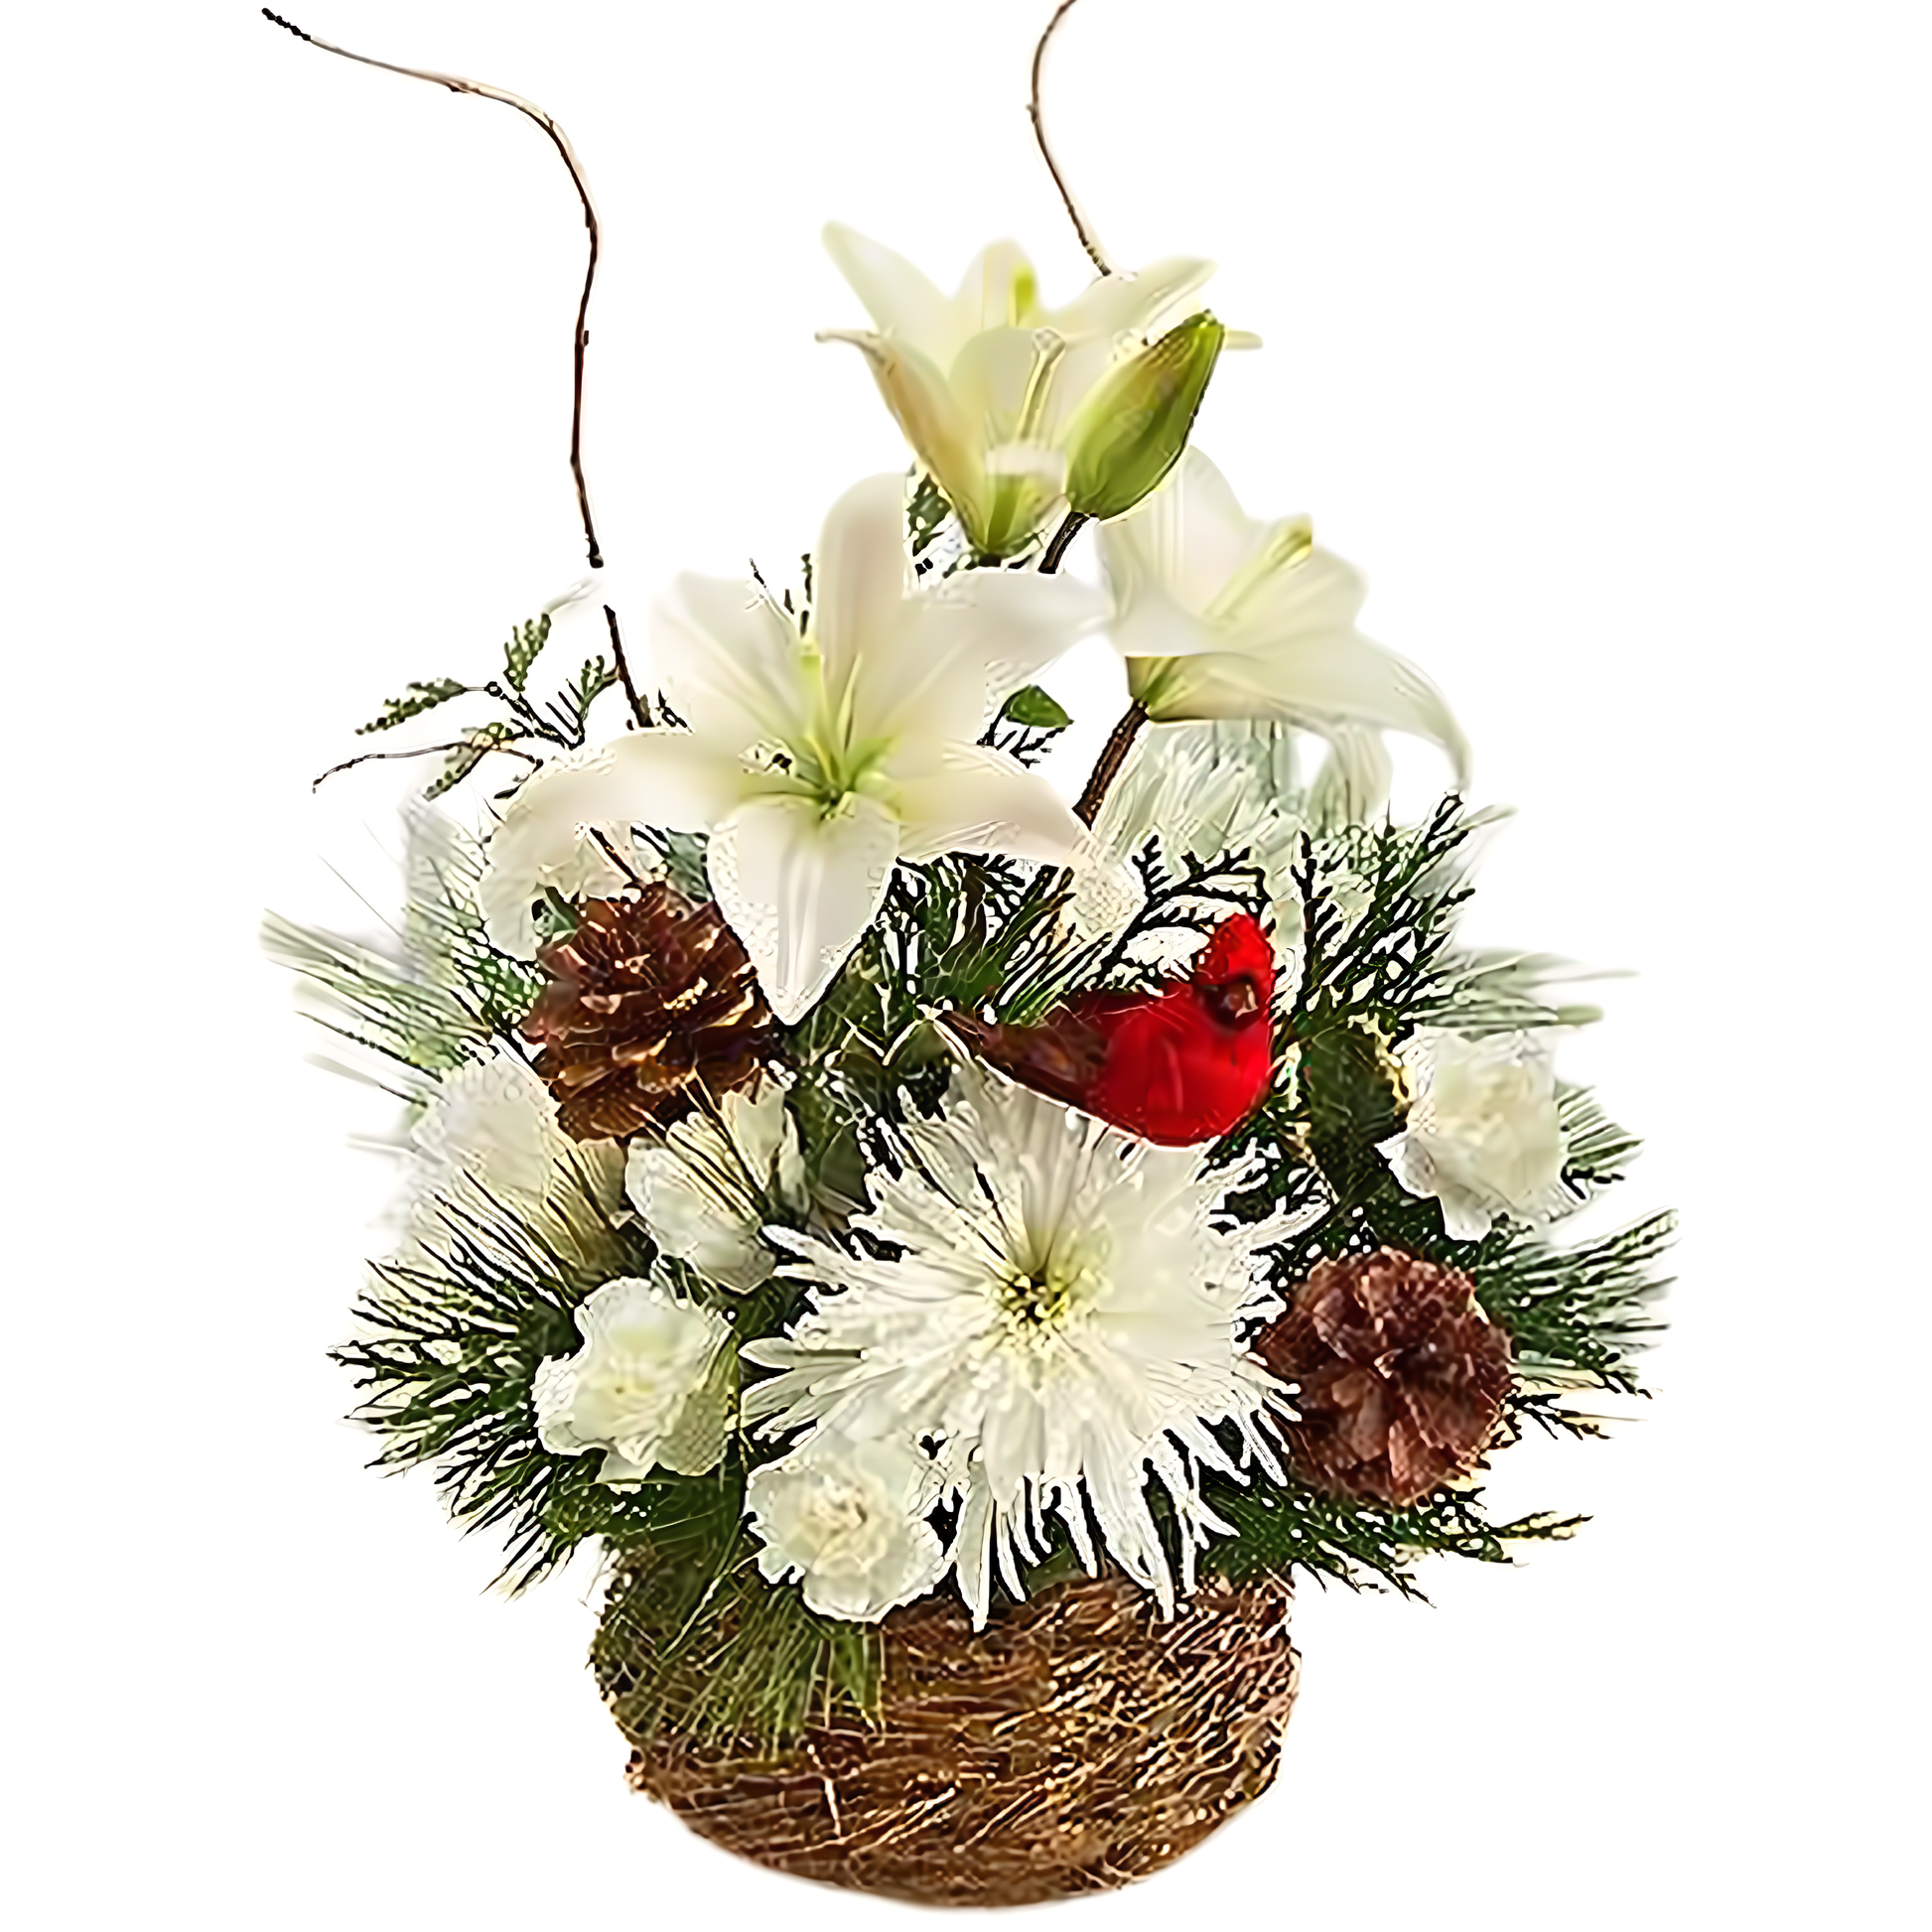 Wintertime Bird's Nest of Flowers - Holiday Collection